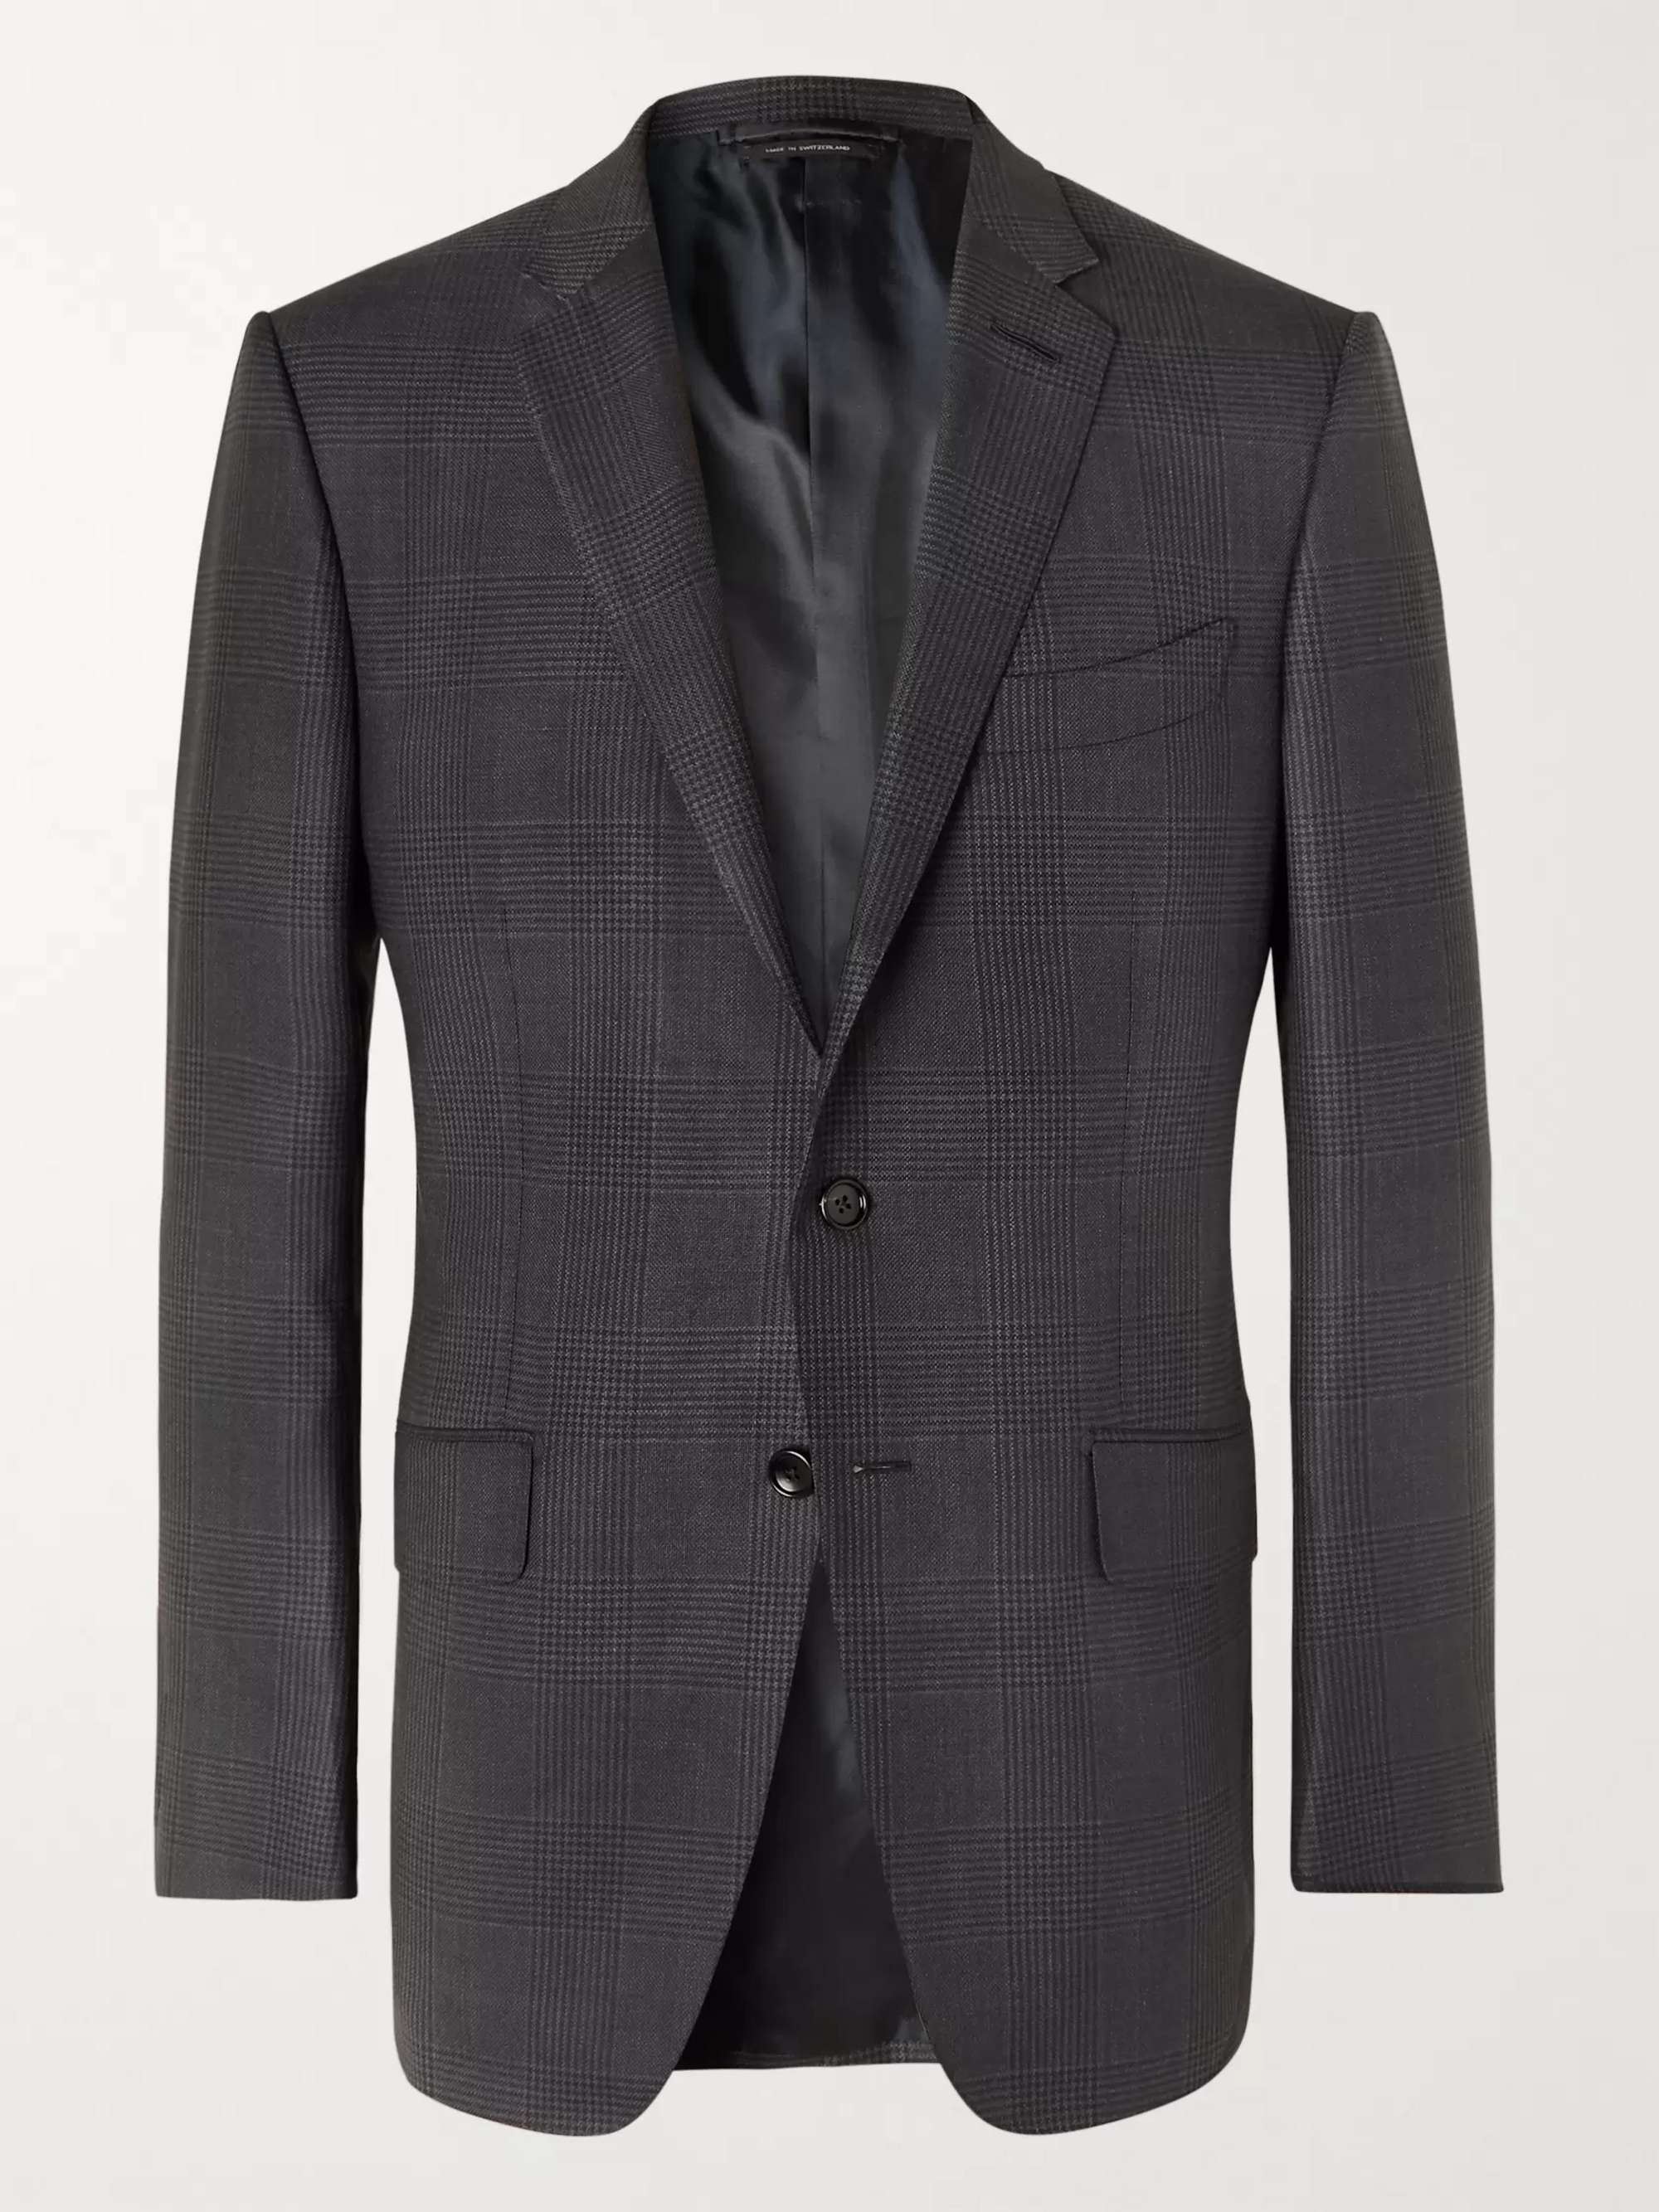 TOM FORD Shelton Slim-Fit Prince of Wales Checked Wool and Silk-Blend Suit Jacket